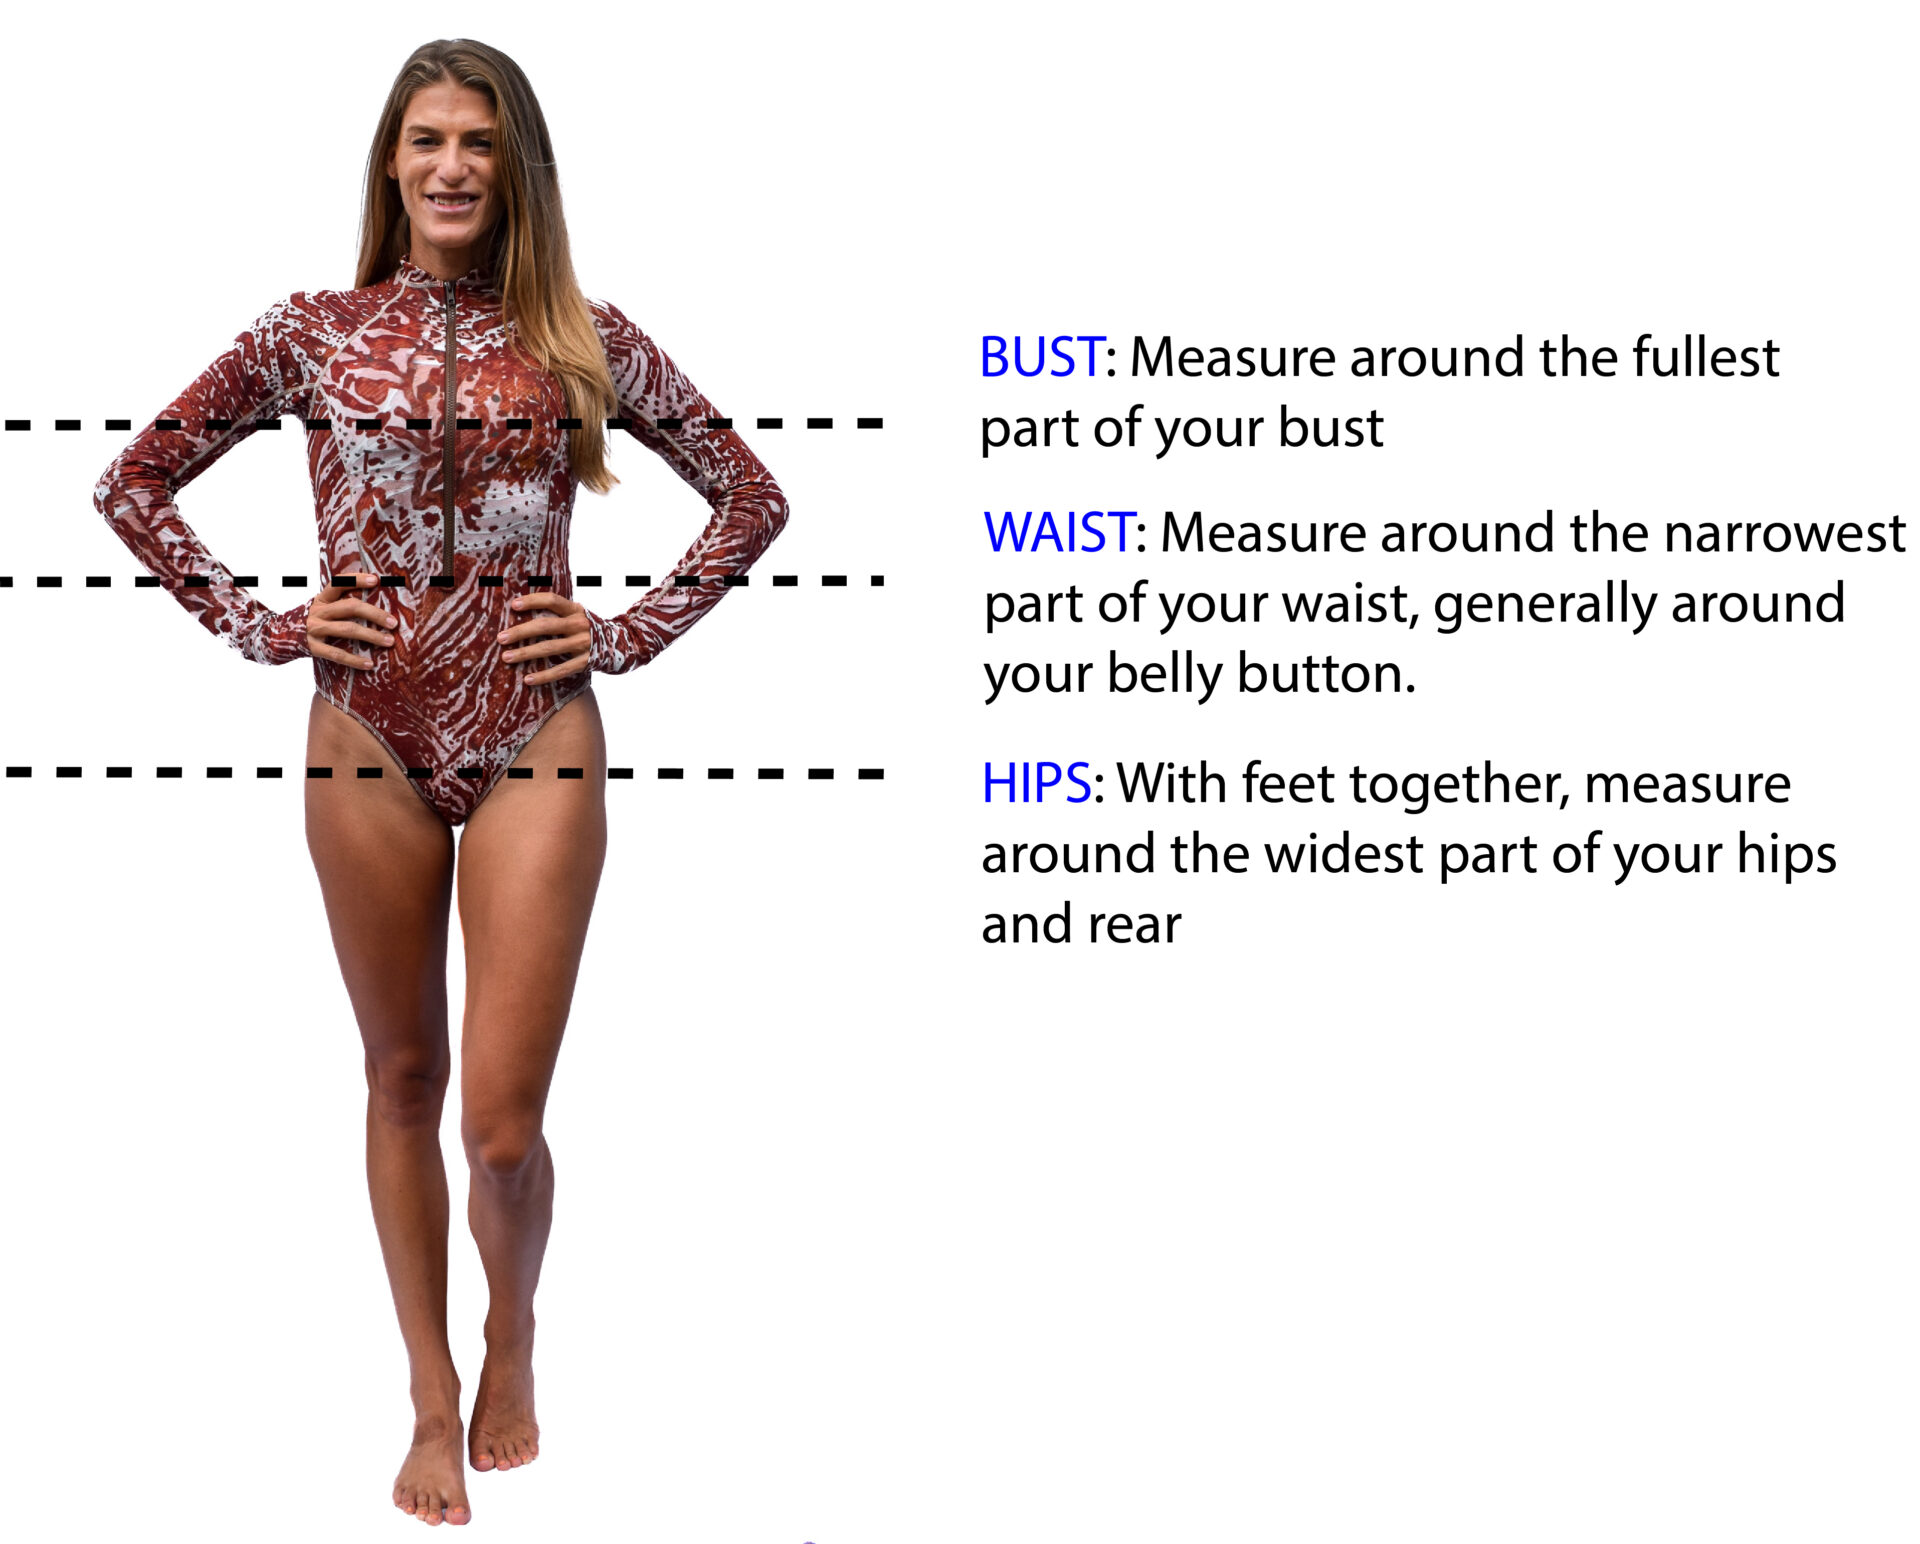 Image showing how to measure bust, waist, and hips